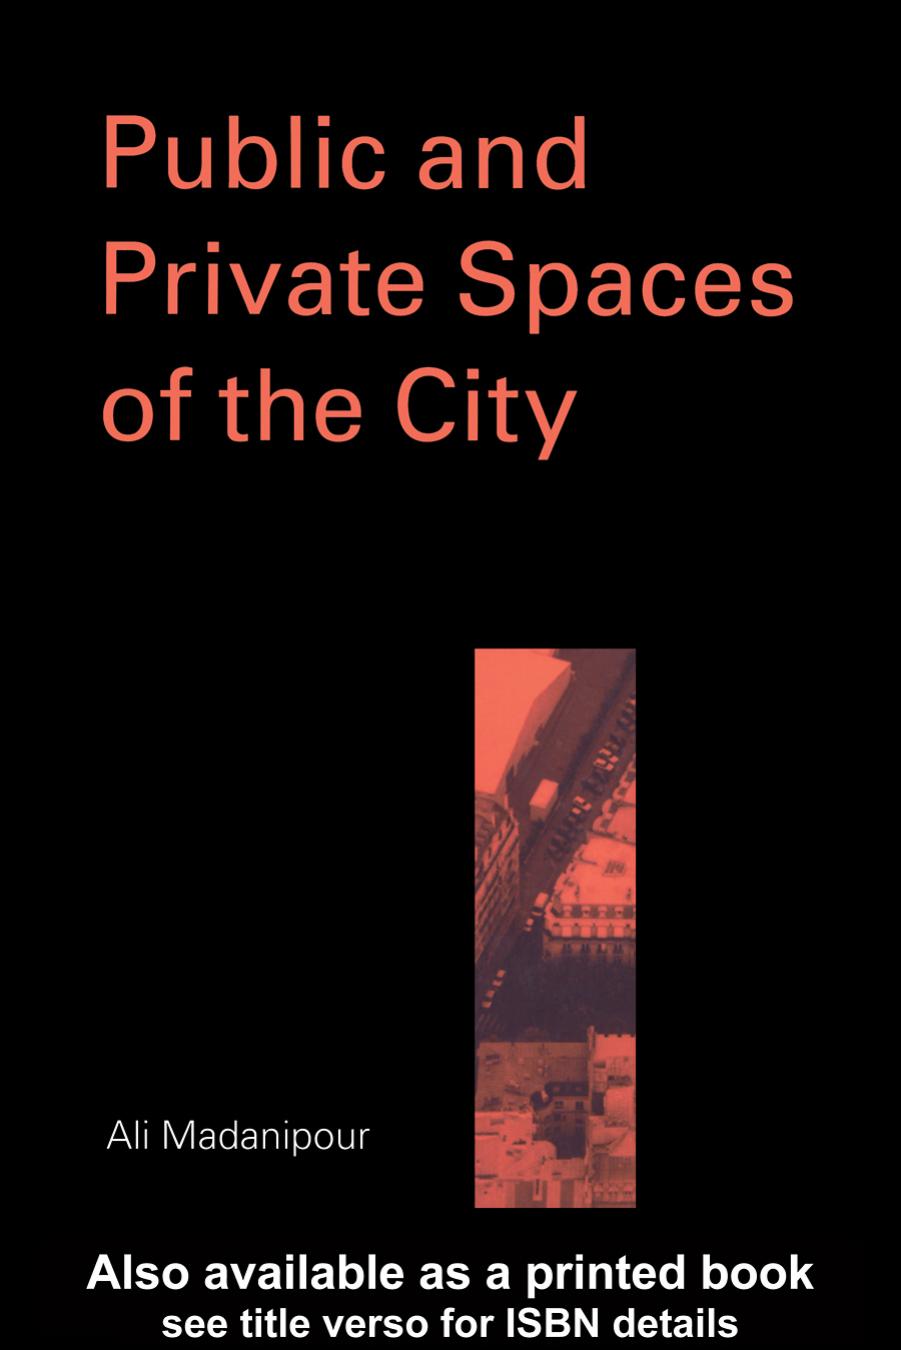 Public and Private Spaces of the City by Ali Madanipour